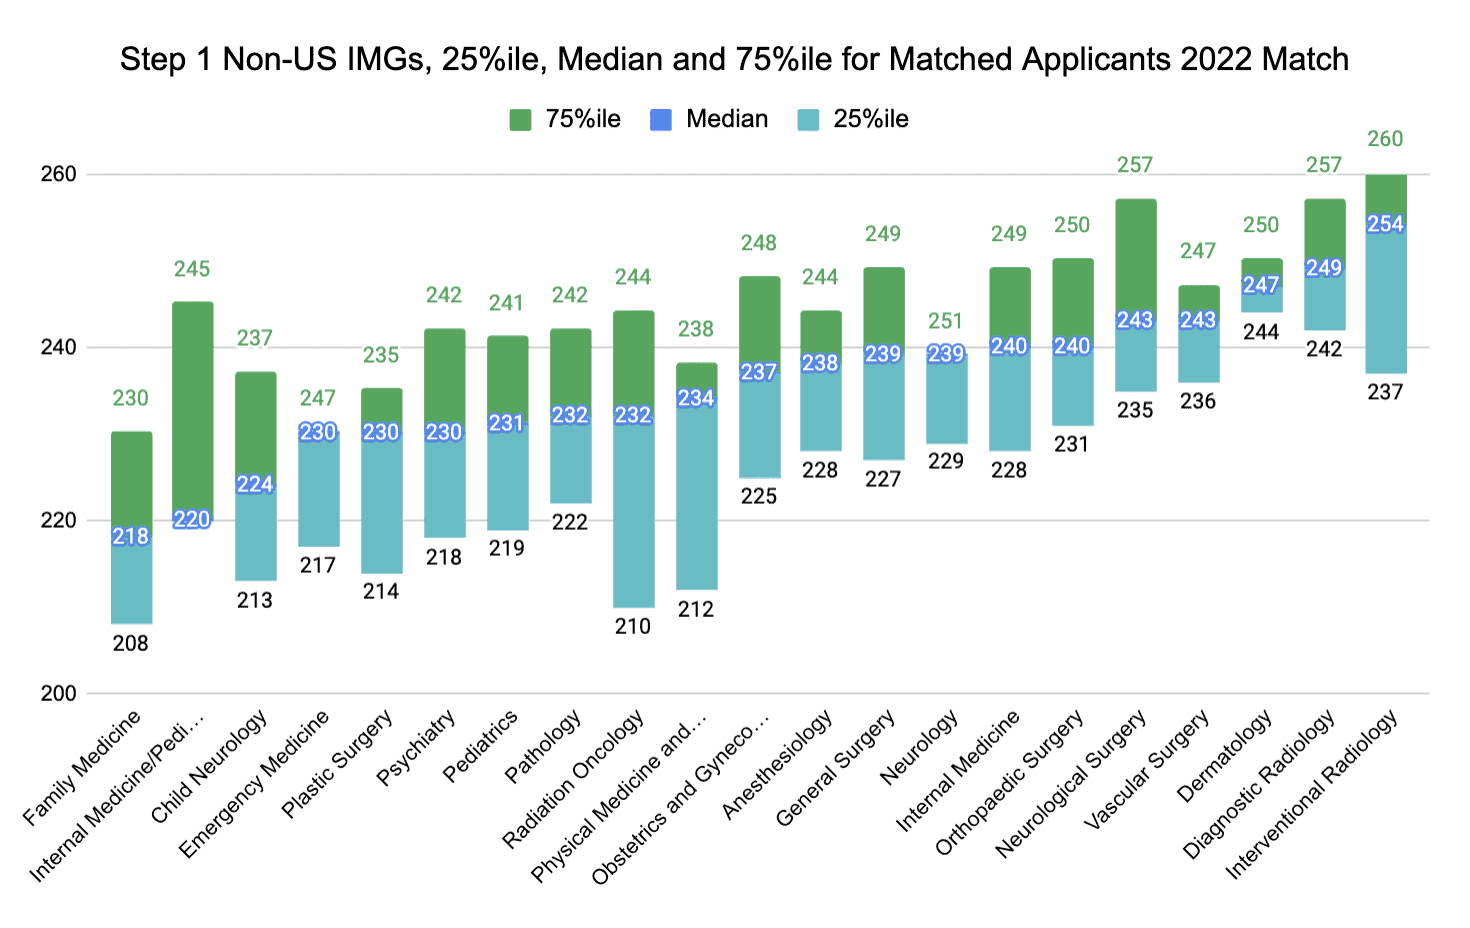 Step 1 Non-US IMGs, 25%ile, Median and 75%ile for Matched Applicants 2022 Match